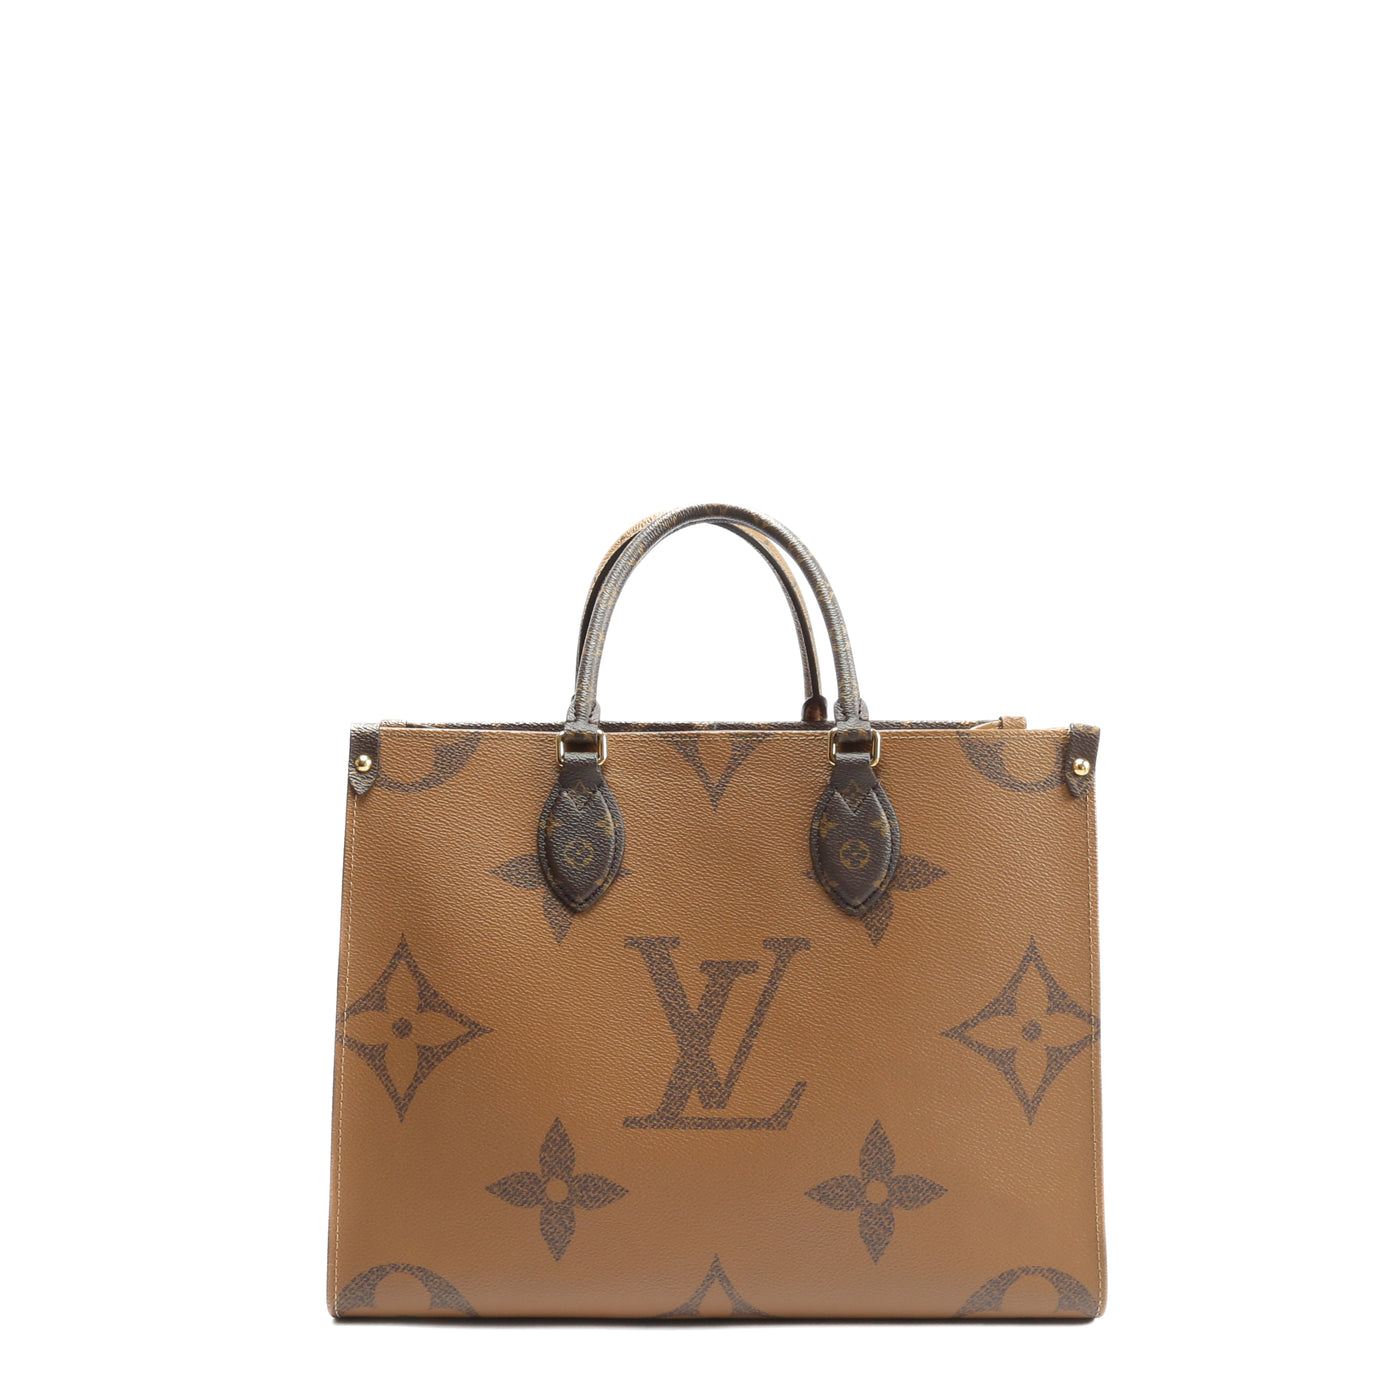 LOUIS VUITTON ONTHEGO GM REVERSE MONOGRAM TOTE AND LV ONTHEGO MM TOTE  EMPREINTE LEATHER COMPARISON 